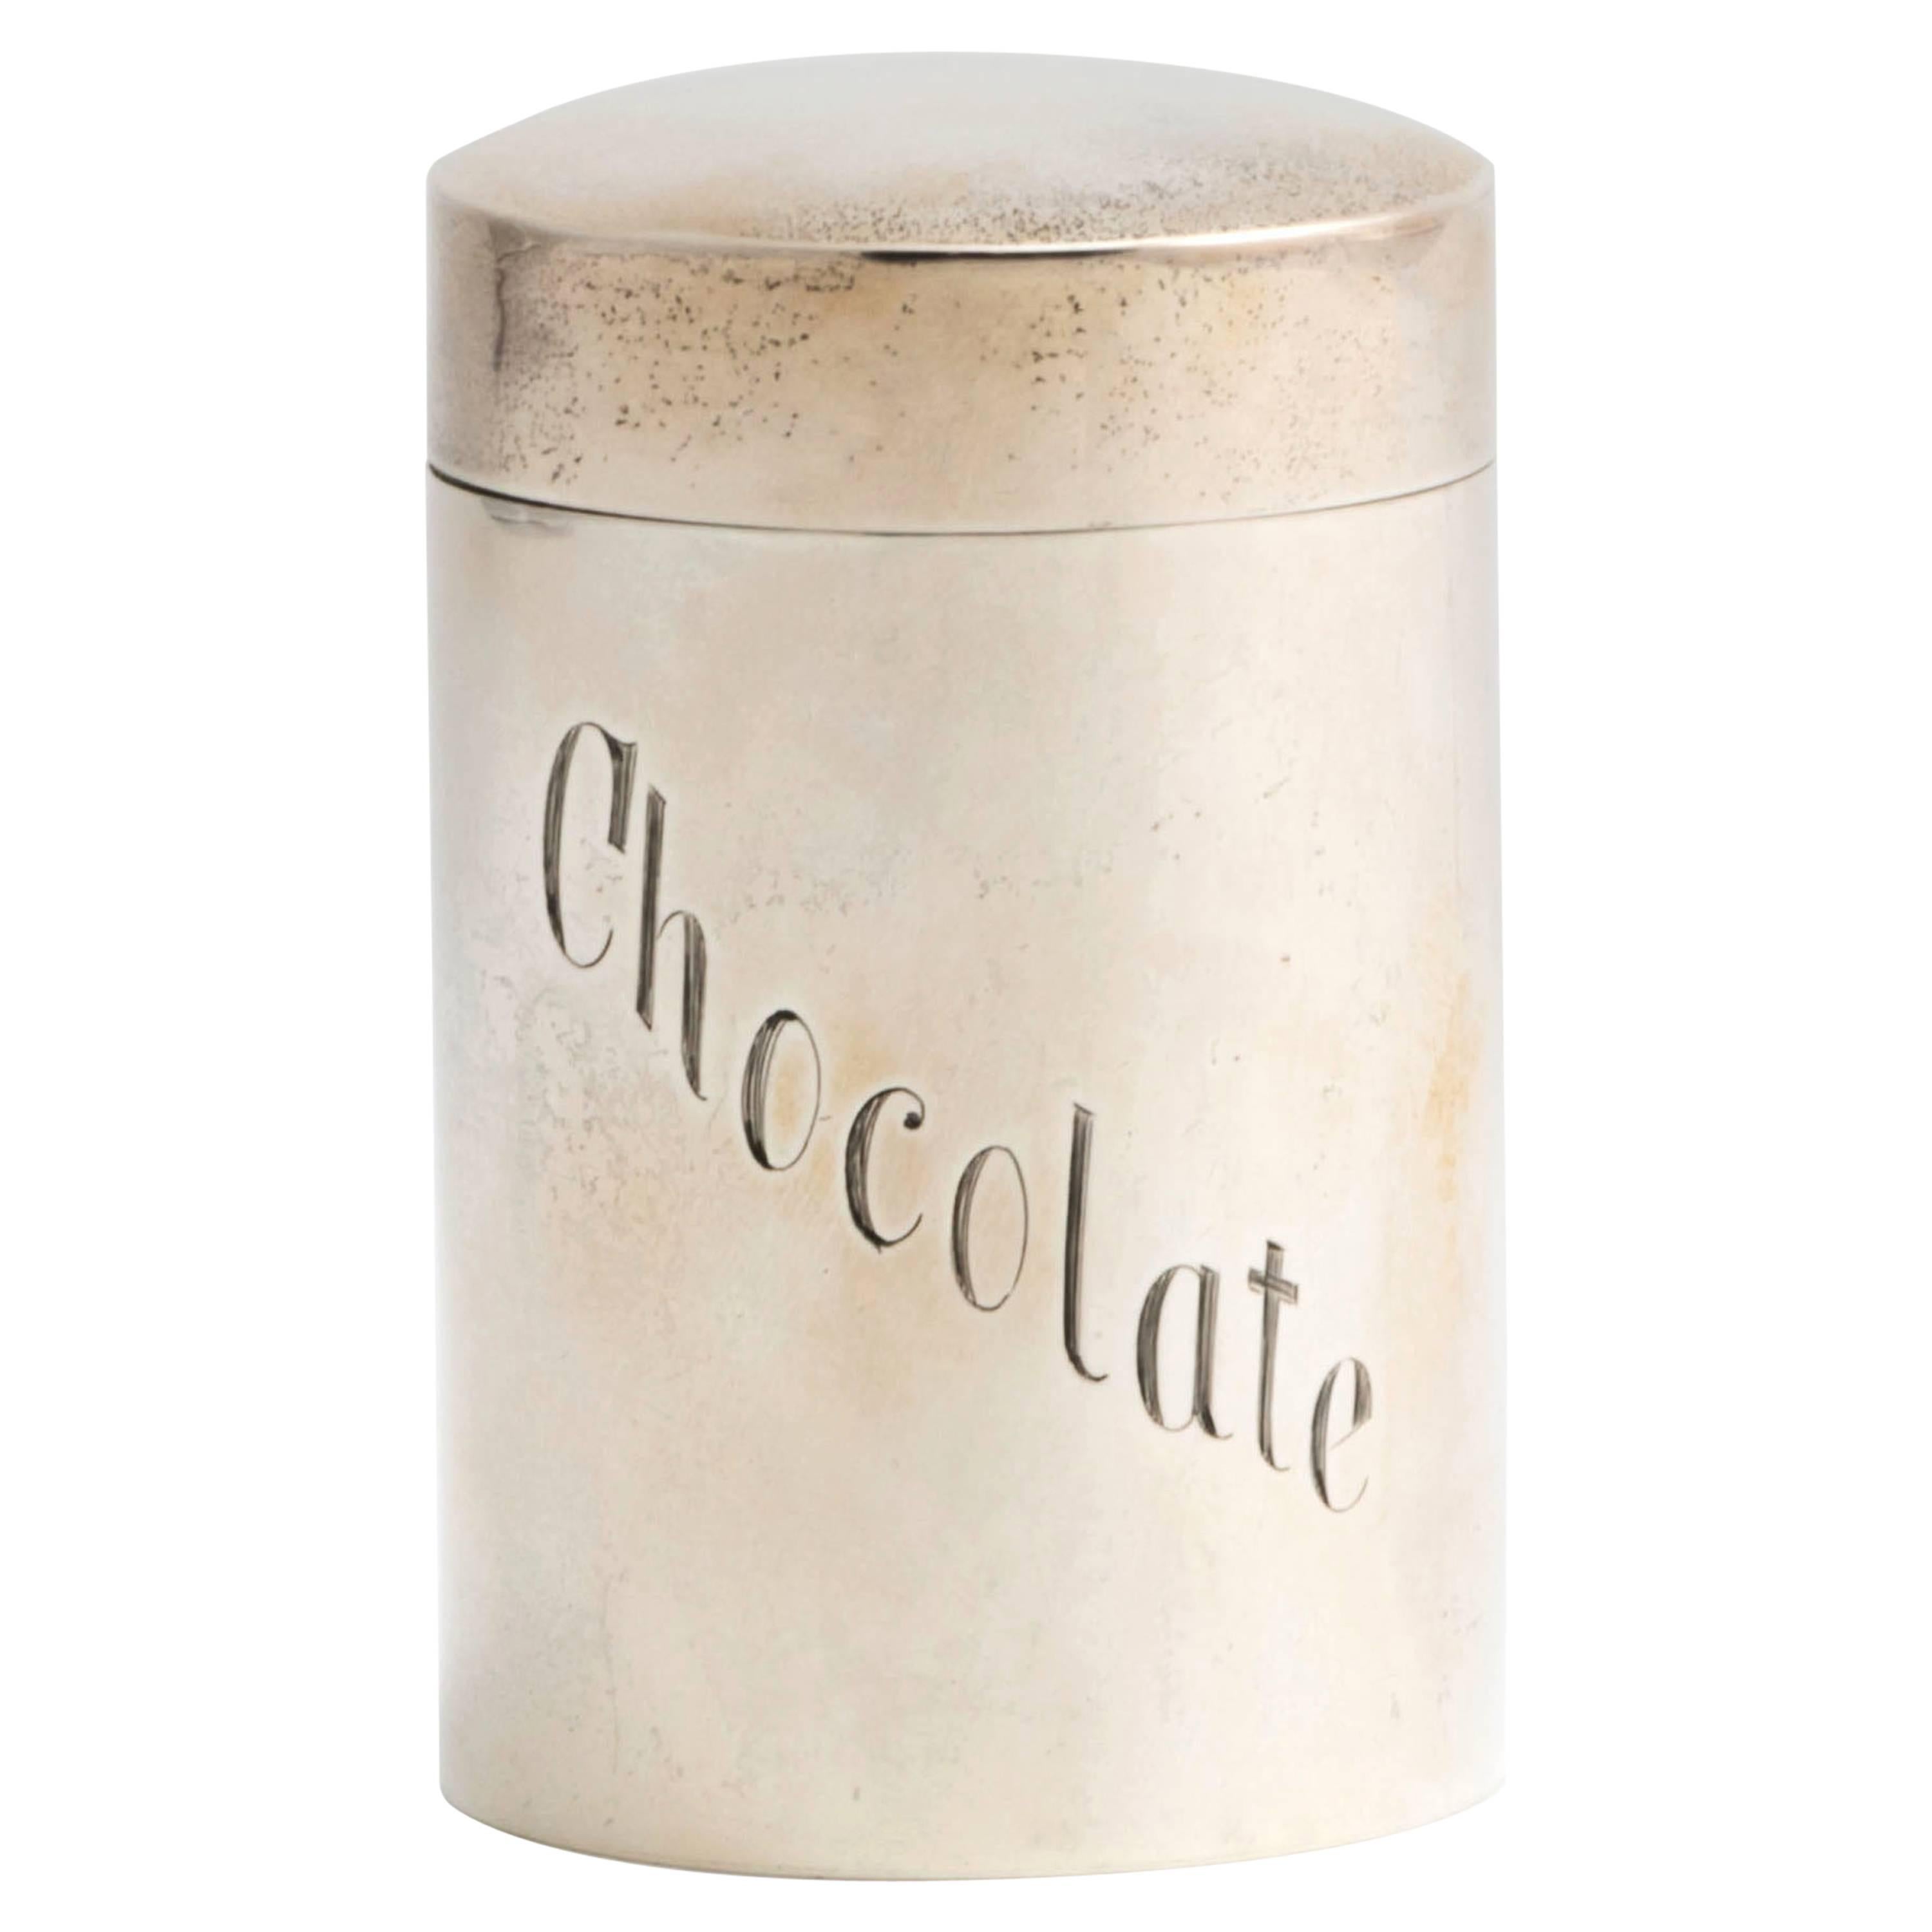 Antique Sterling Silver Chocolate Canister by Saunders and Shepherd